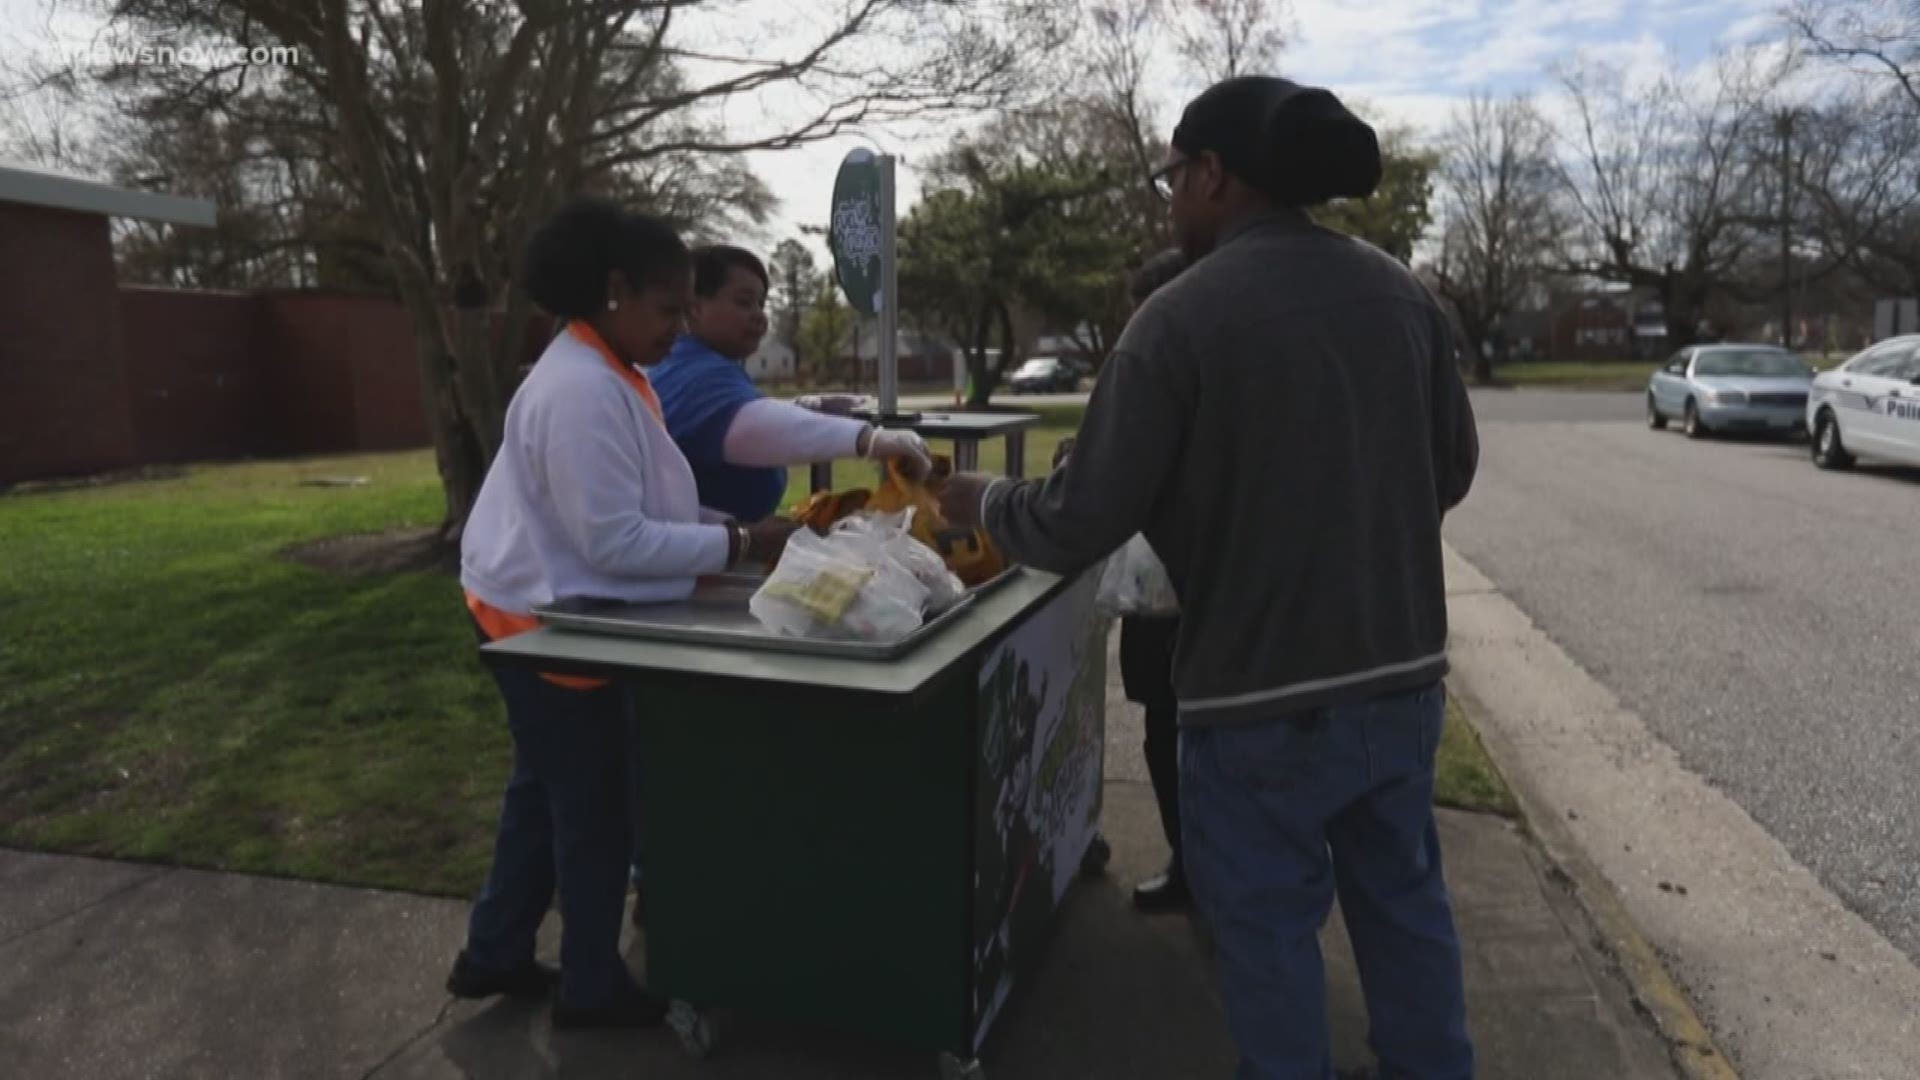 With school canceled for two weeks, area school divisions are switching to curbside delivery food service to help families in need.